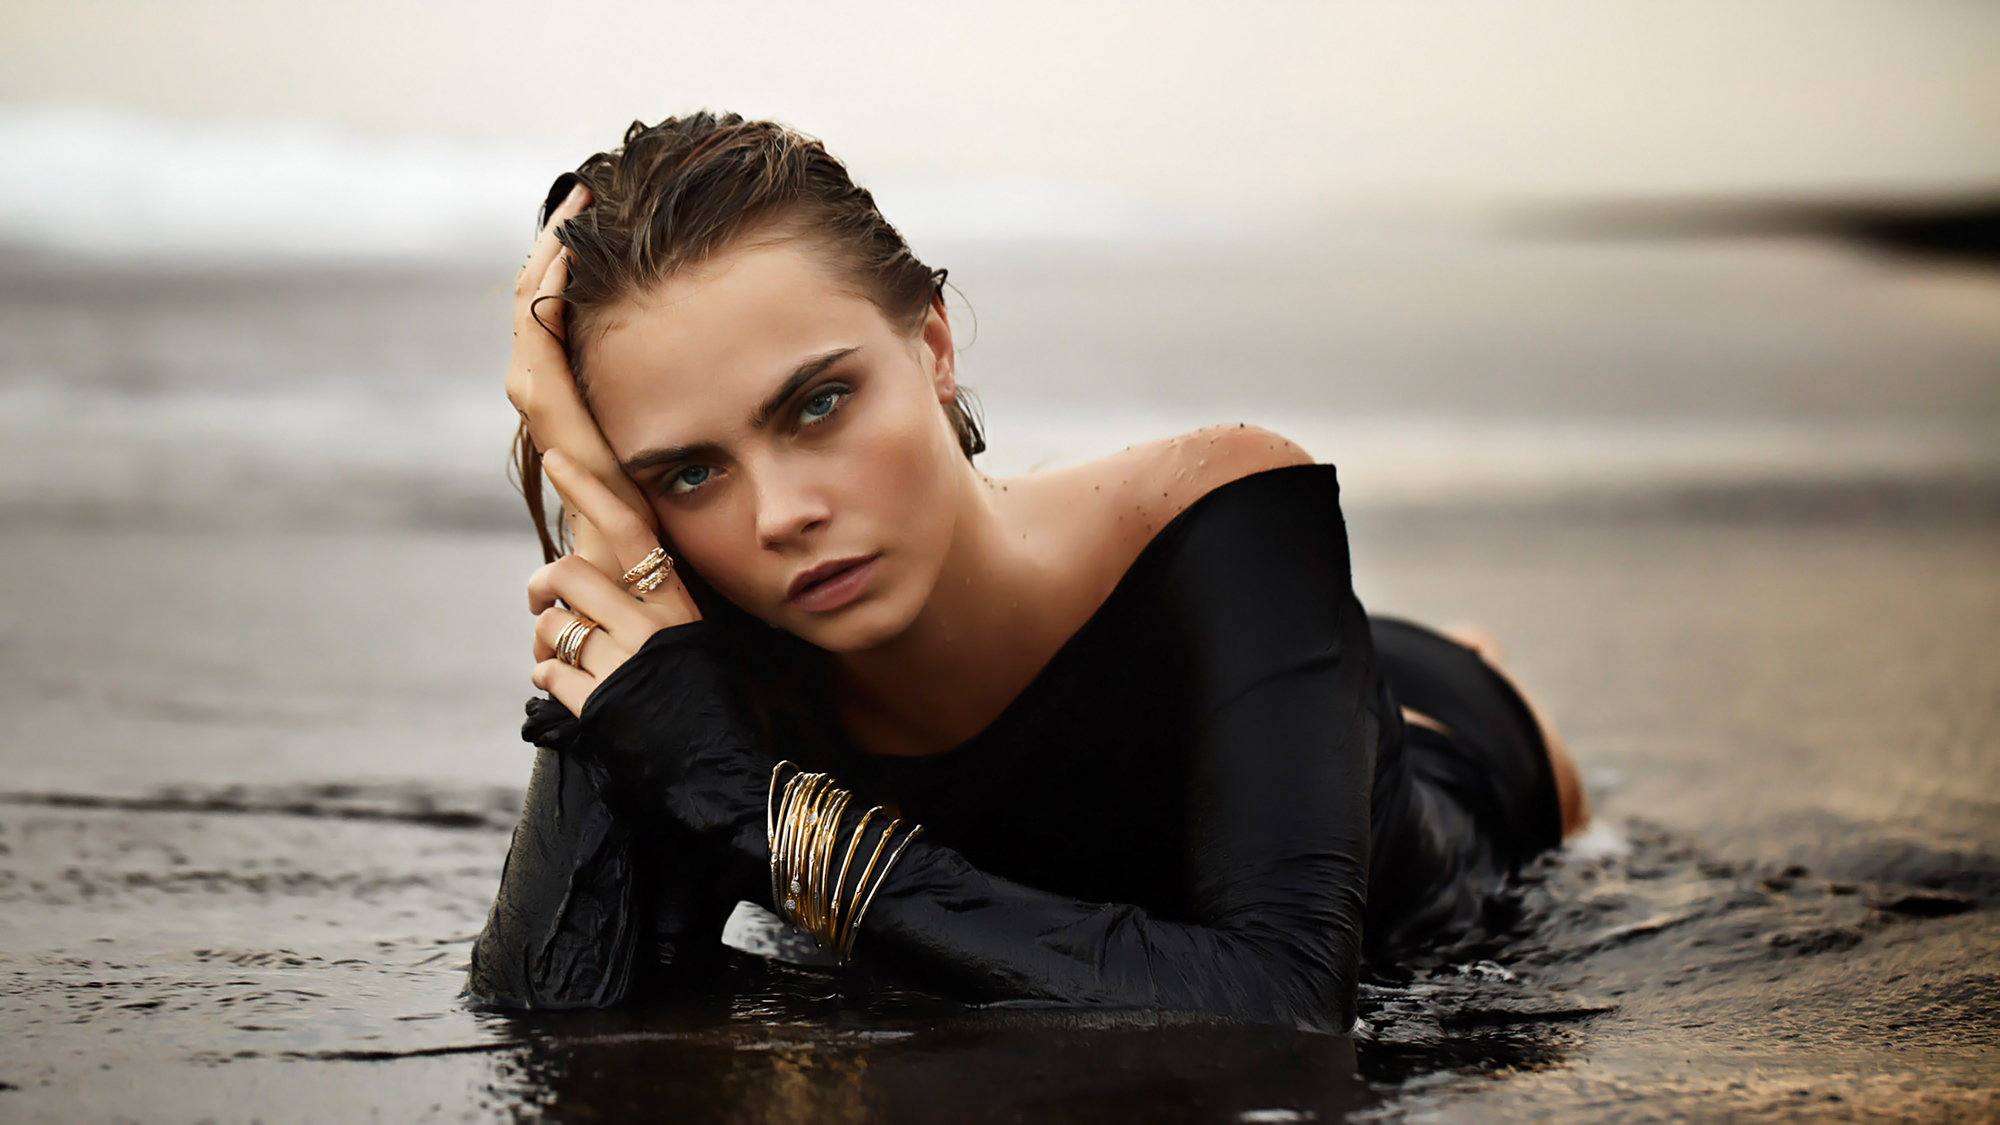 Cara Delevingne Photoshoot 2017, HD Celebrities, 4k Wallpapers, Images